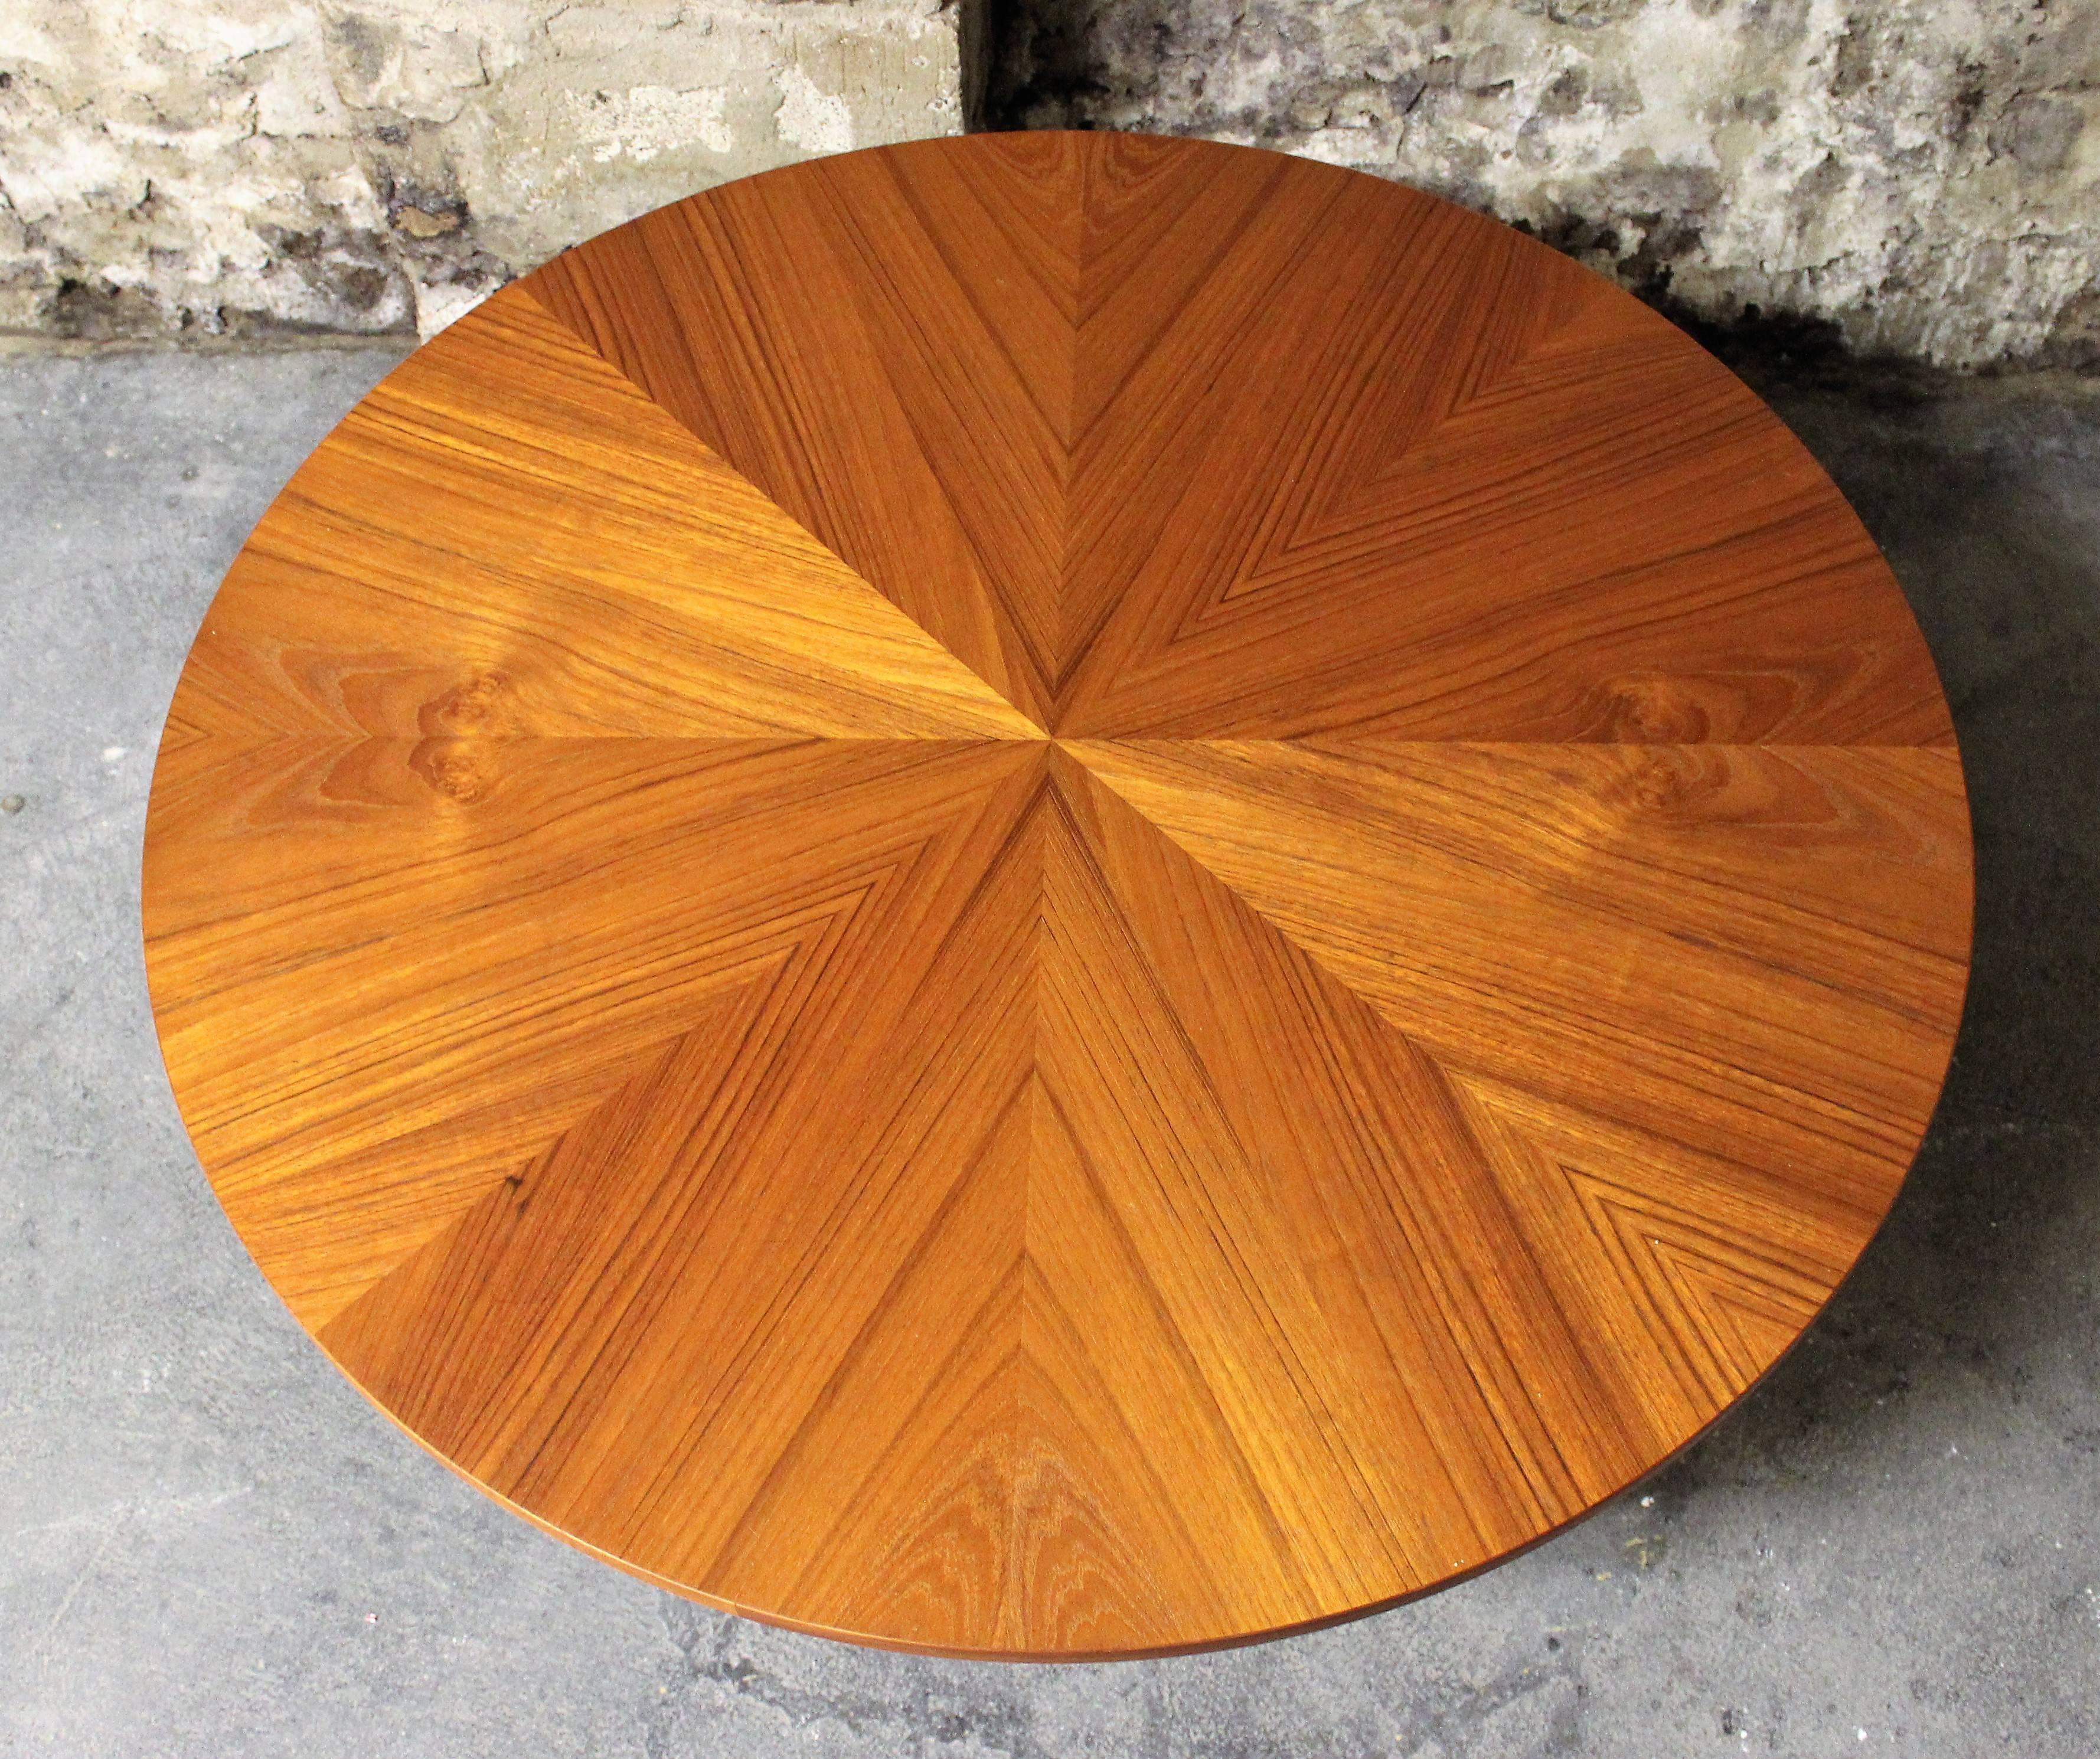 Truly stunning mid-century modern round teak coffee table. Designed by Danish designer Søren Georg Jensen and made by Kubus. Sculptural solid teak frame and teak top with amazing starburst design.

Scandinavian Modern / Mid-Century Modern